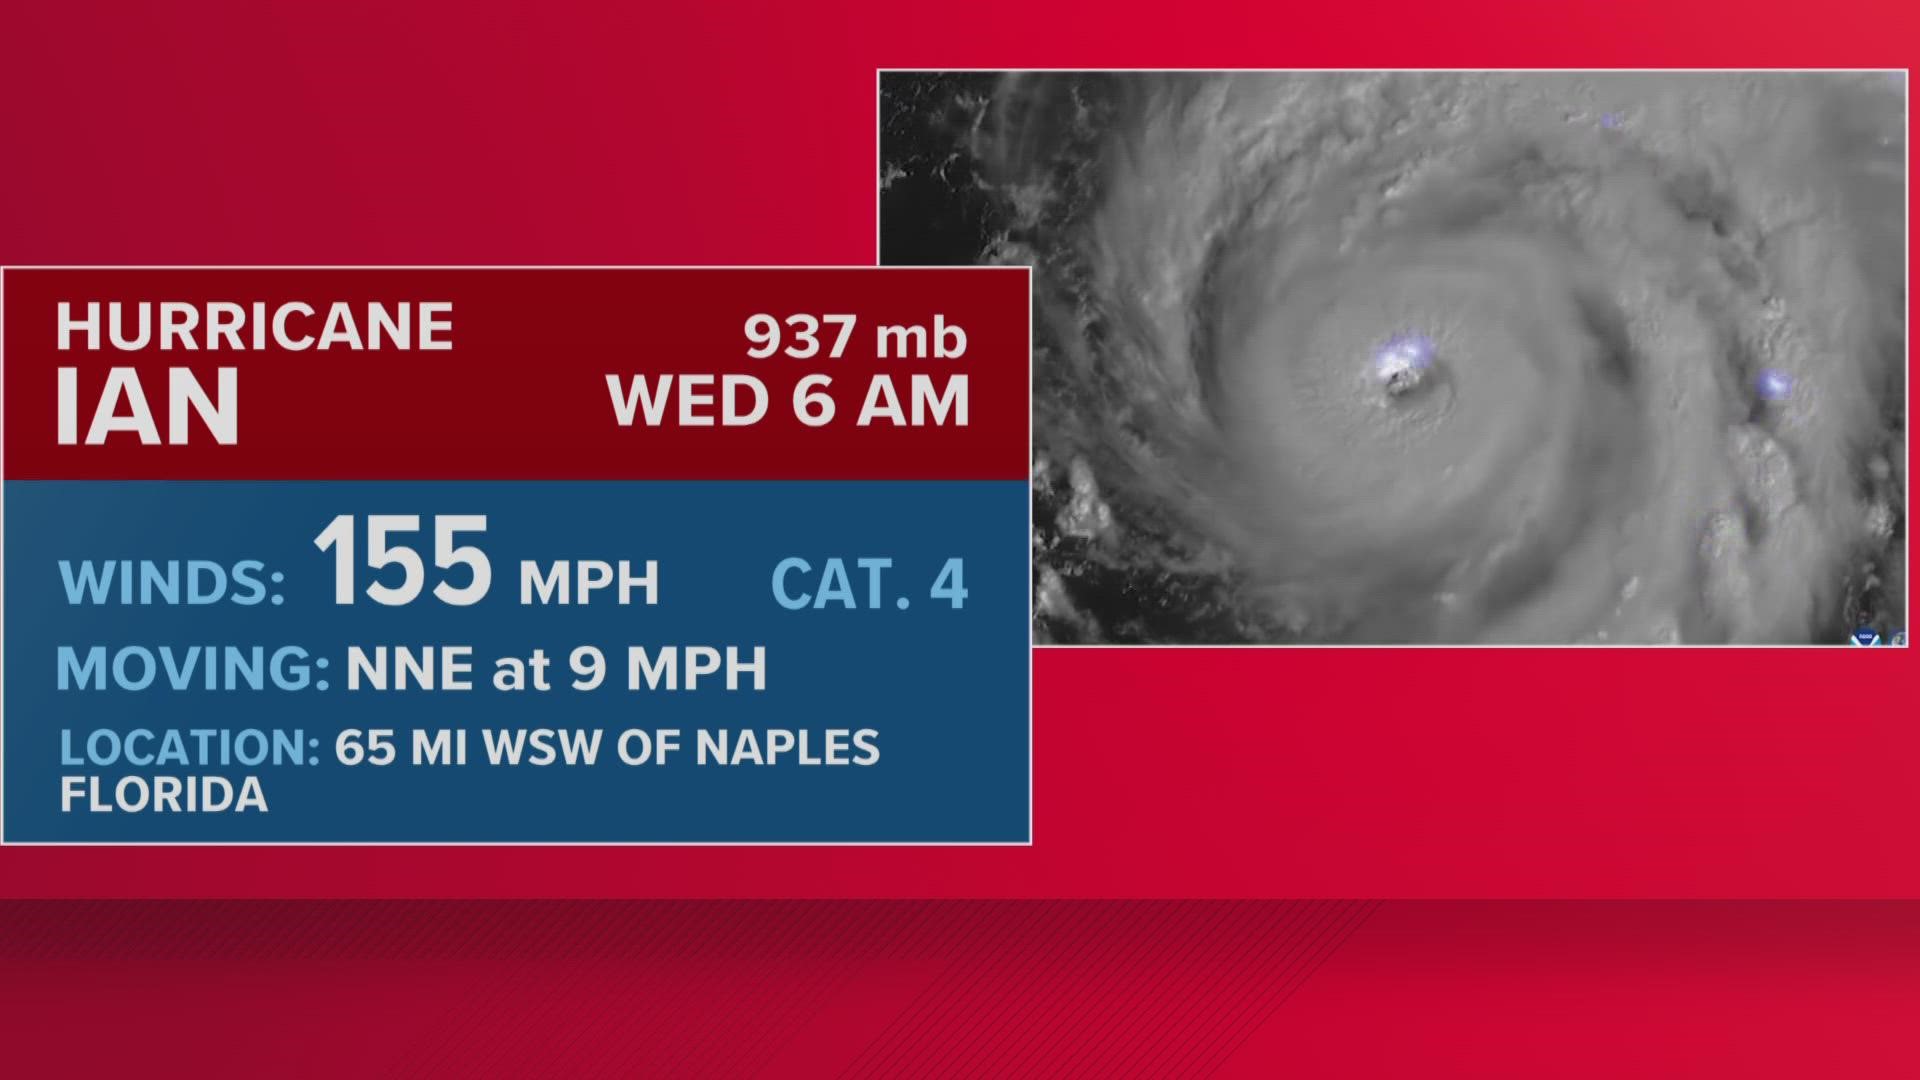 Ian is expected to make landfall late Wednesday near Charlotte Harbor.